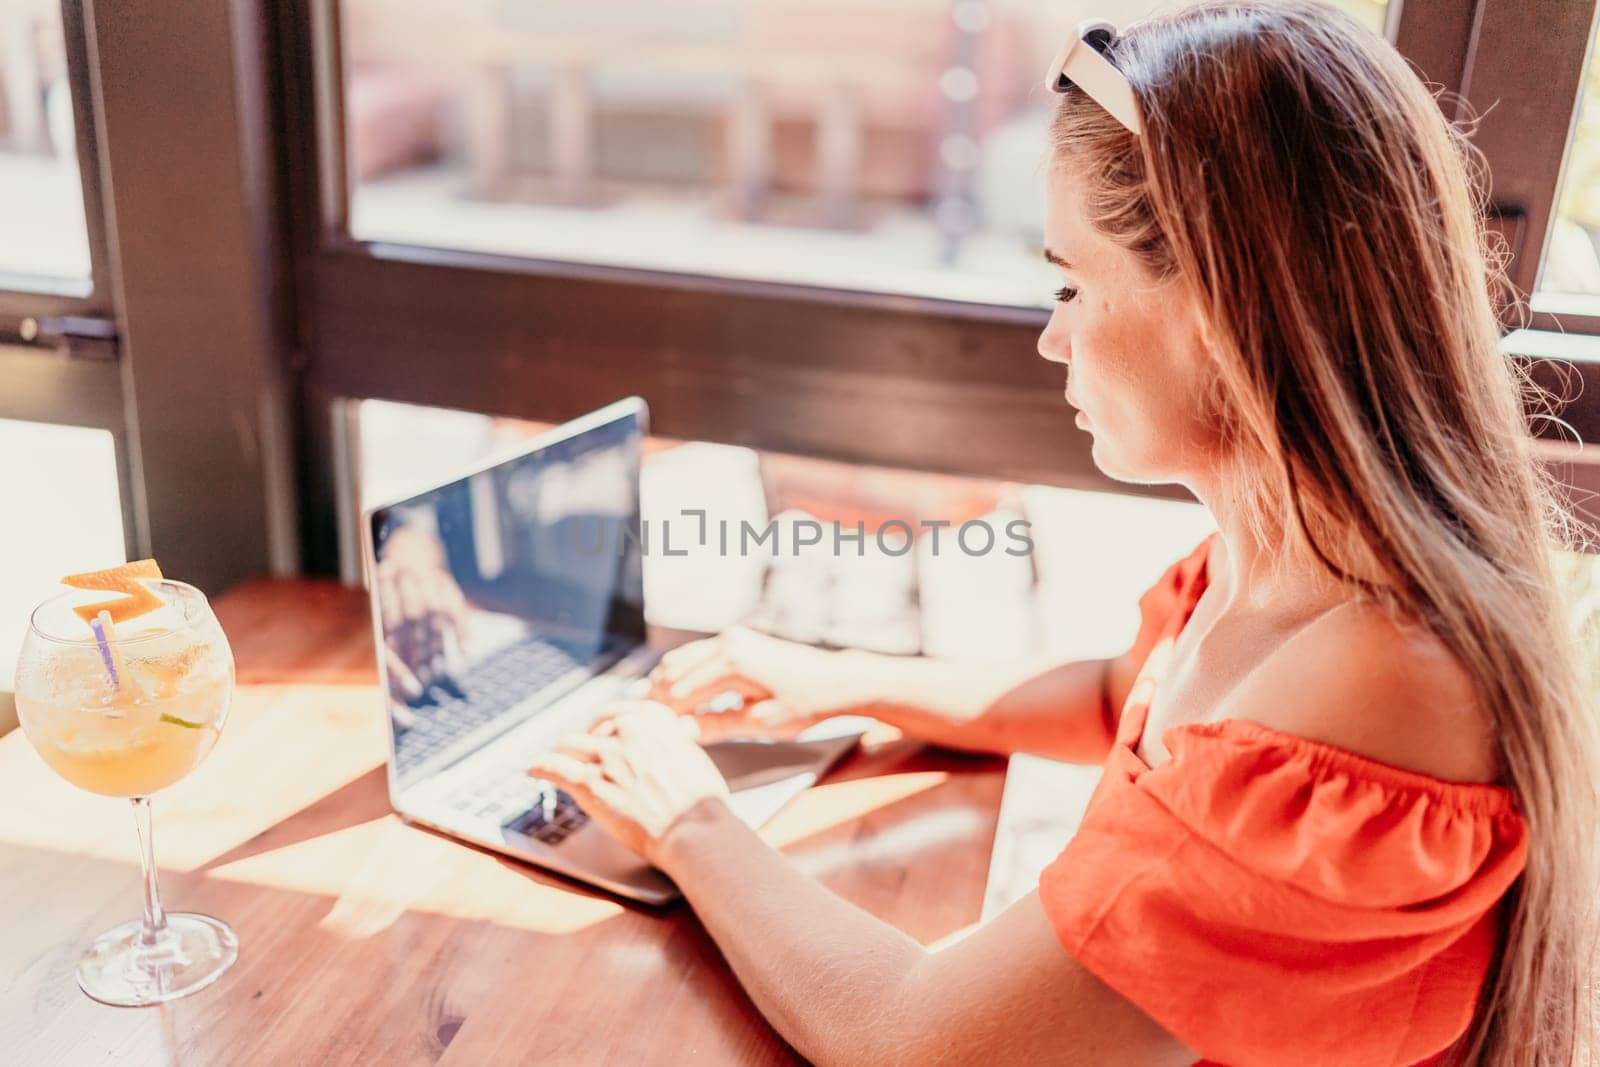 Woman works on laptop in a sunny cafe, glass of juice nearby. The setting is modern, with natural light illuminating the space. The image captures a moment of focused work